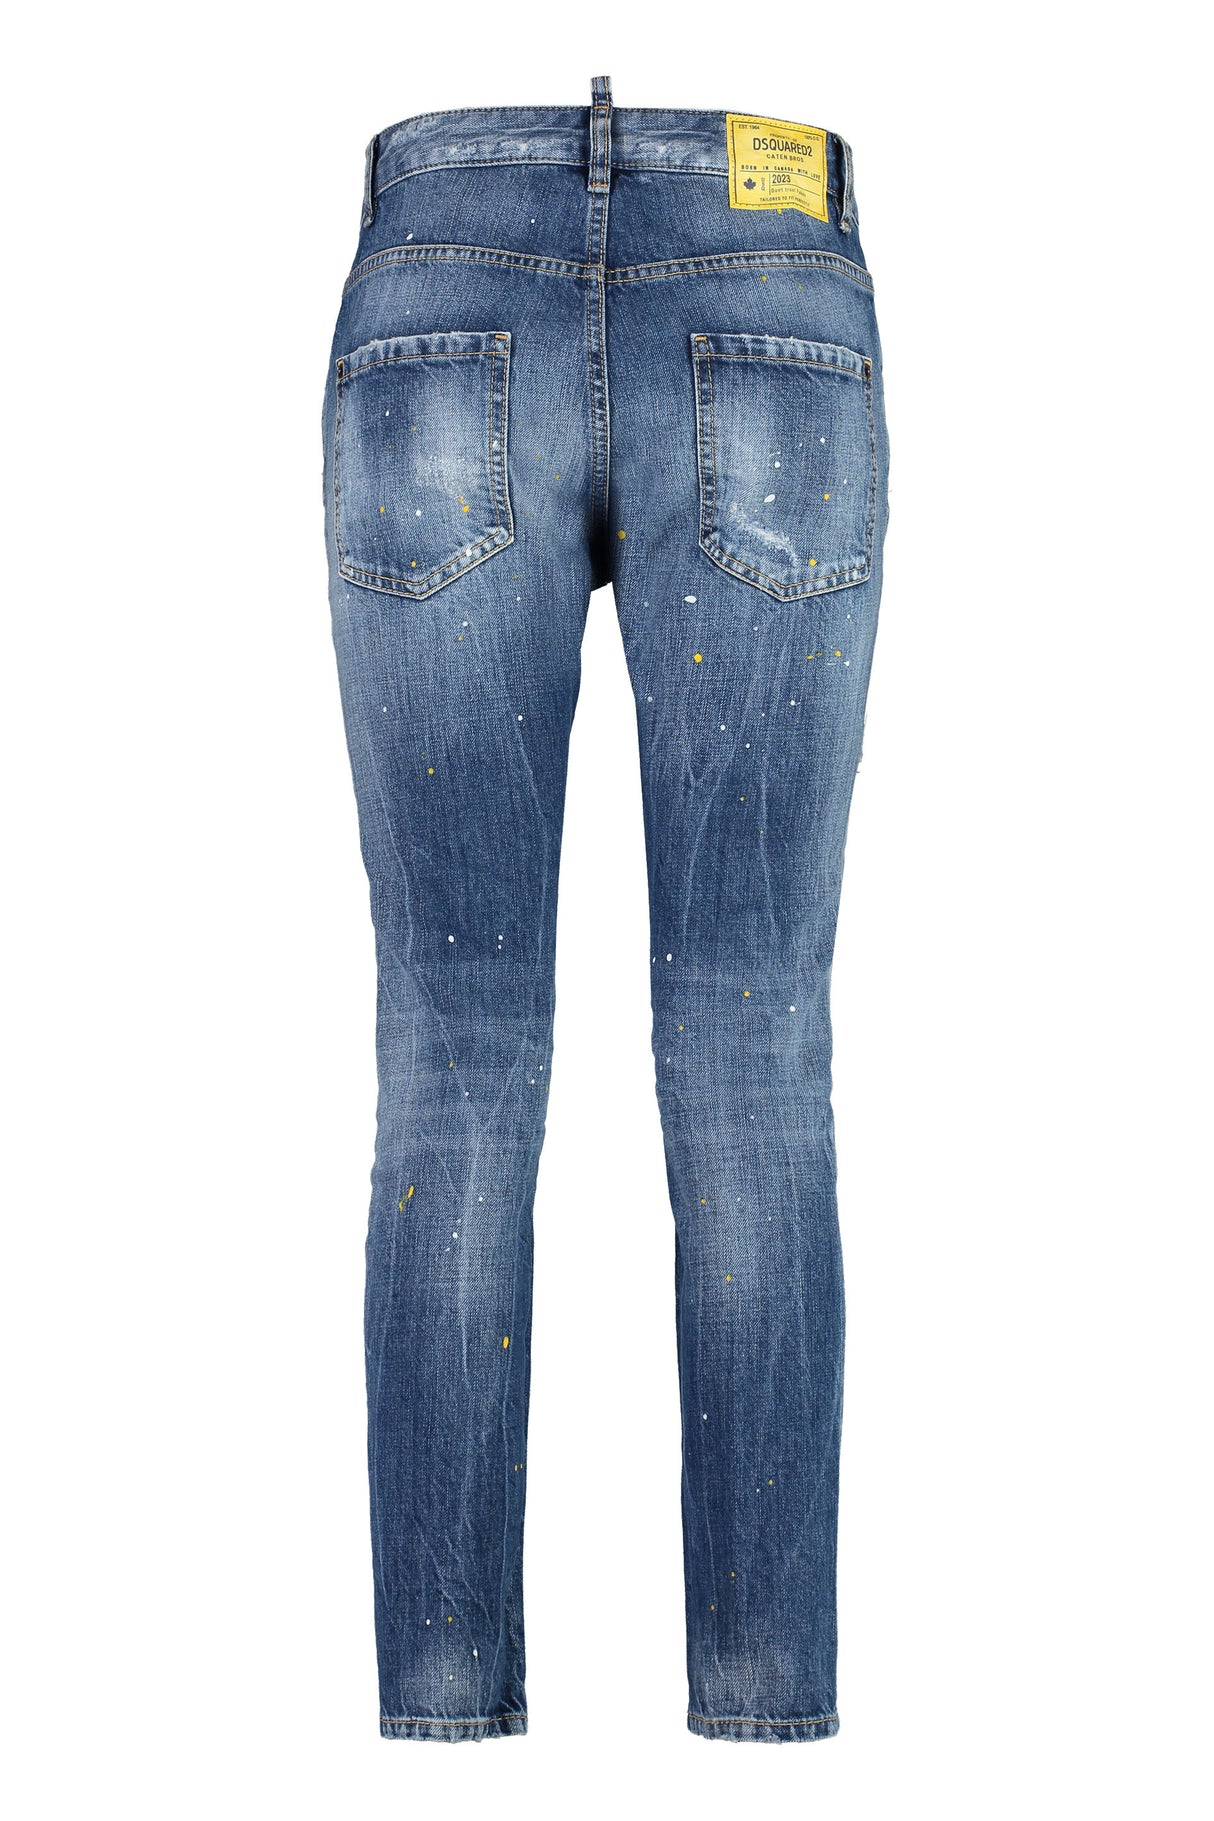 DSQUARED2 Cool Girl Cropped Jeans - Distressed with Paint Effect Print, 100% Cotton